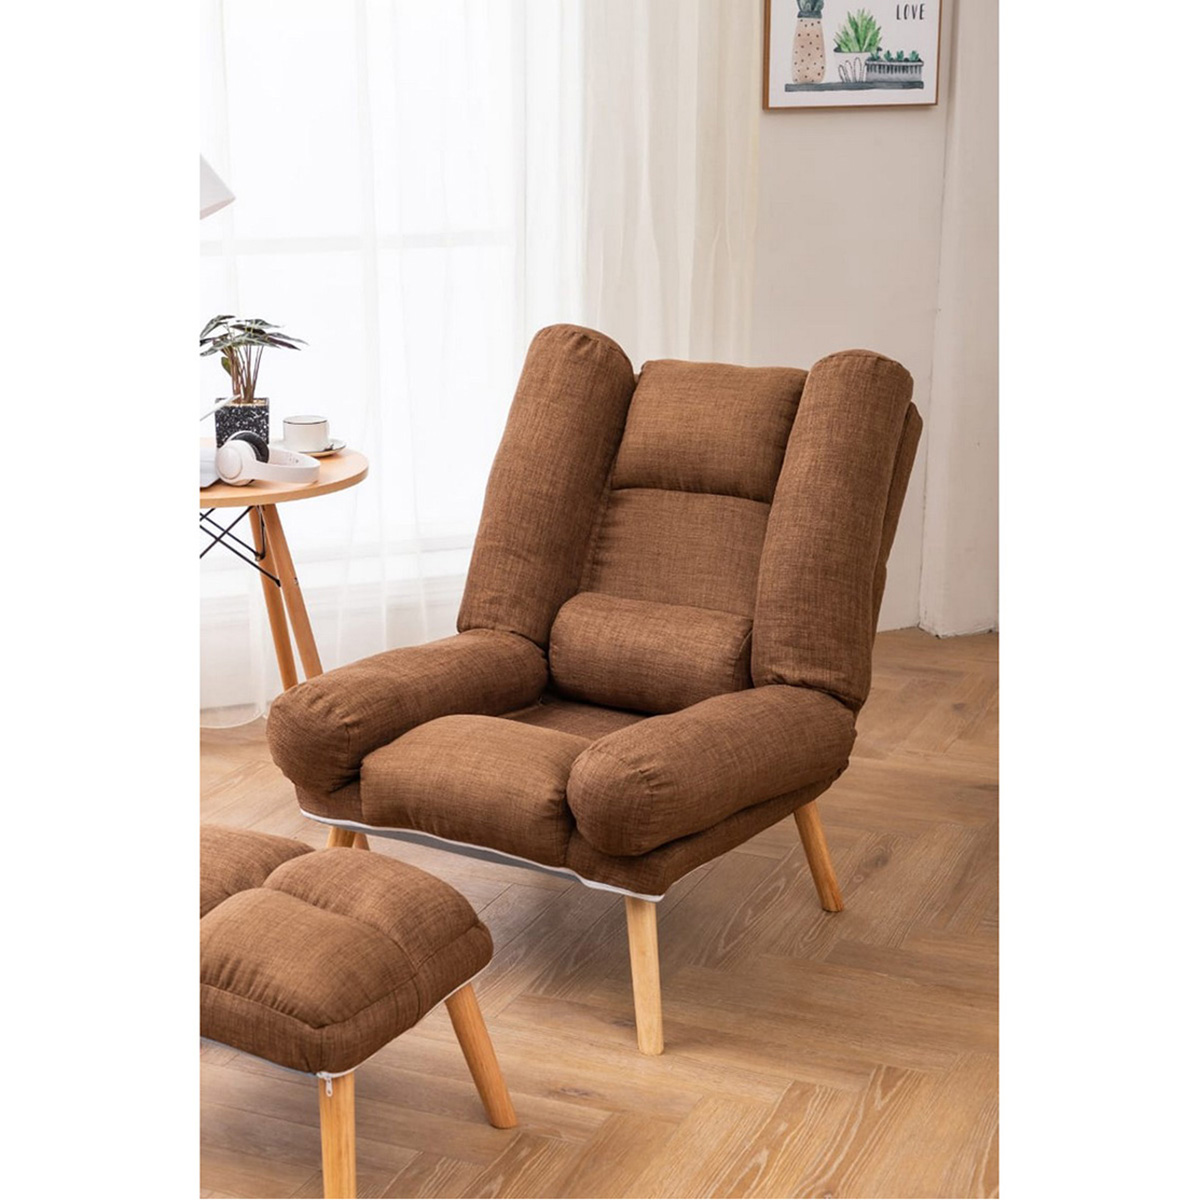 Recliner Chaise Chair With Footrerst -adjustable & Foldable